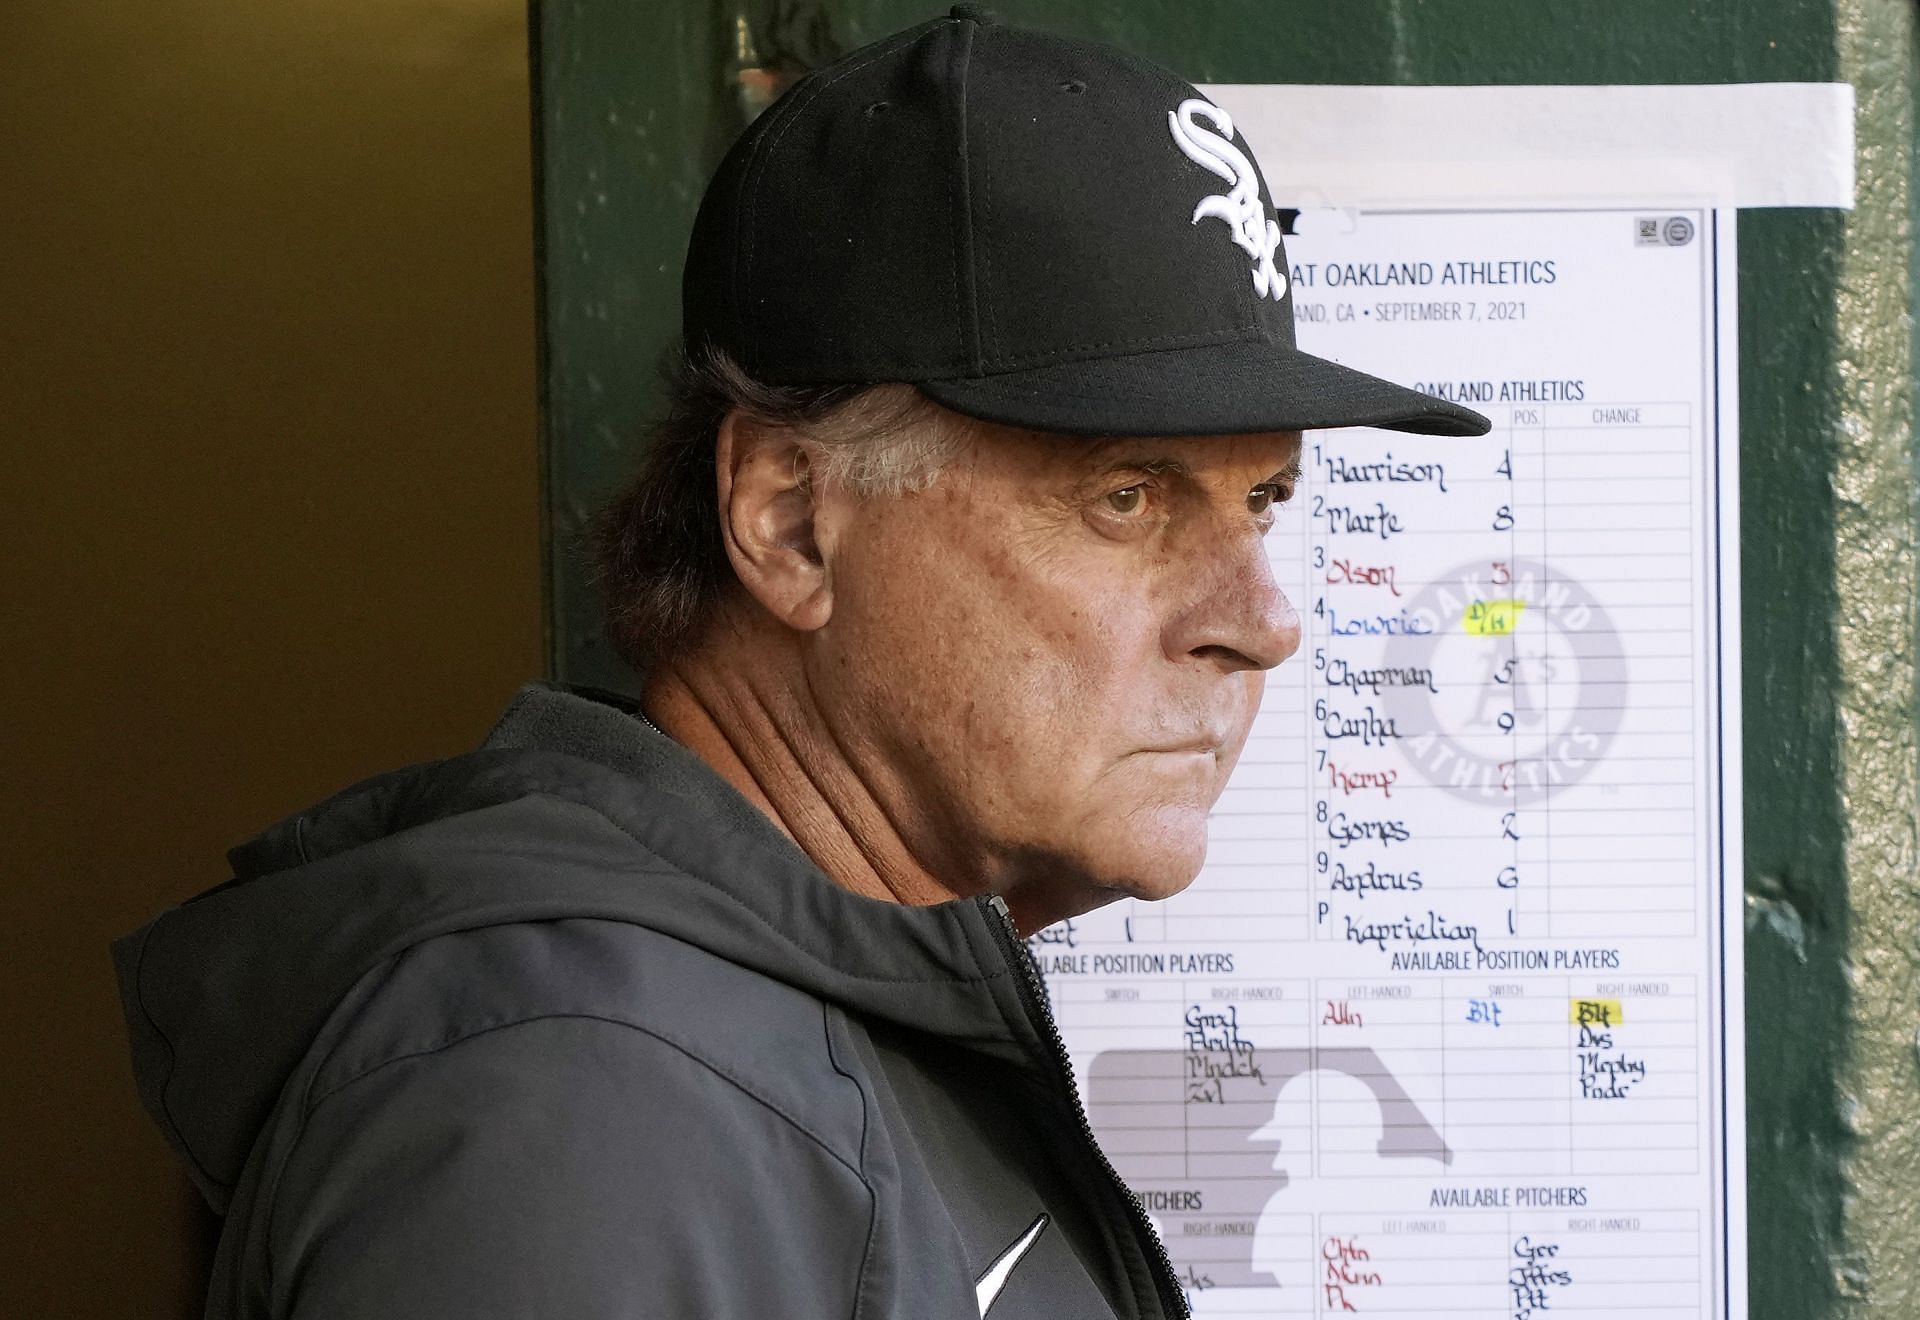 Chicago White Sox manager Tony La Russa made pointed comments towards San Francisco Giants manager Gabe Kapler